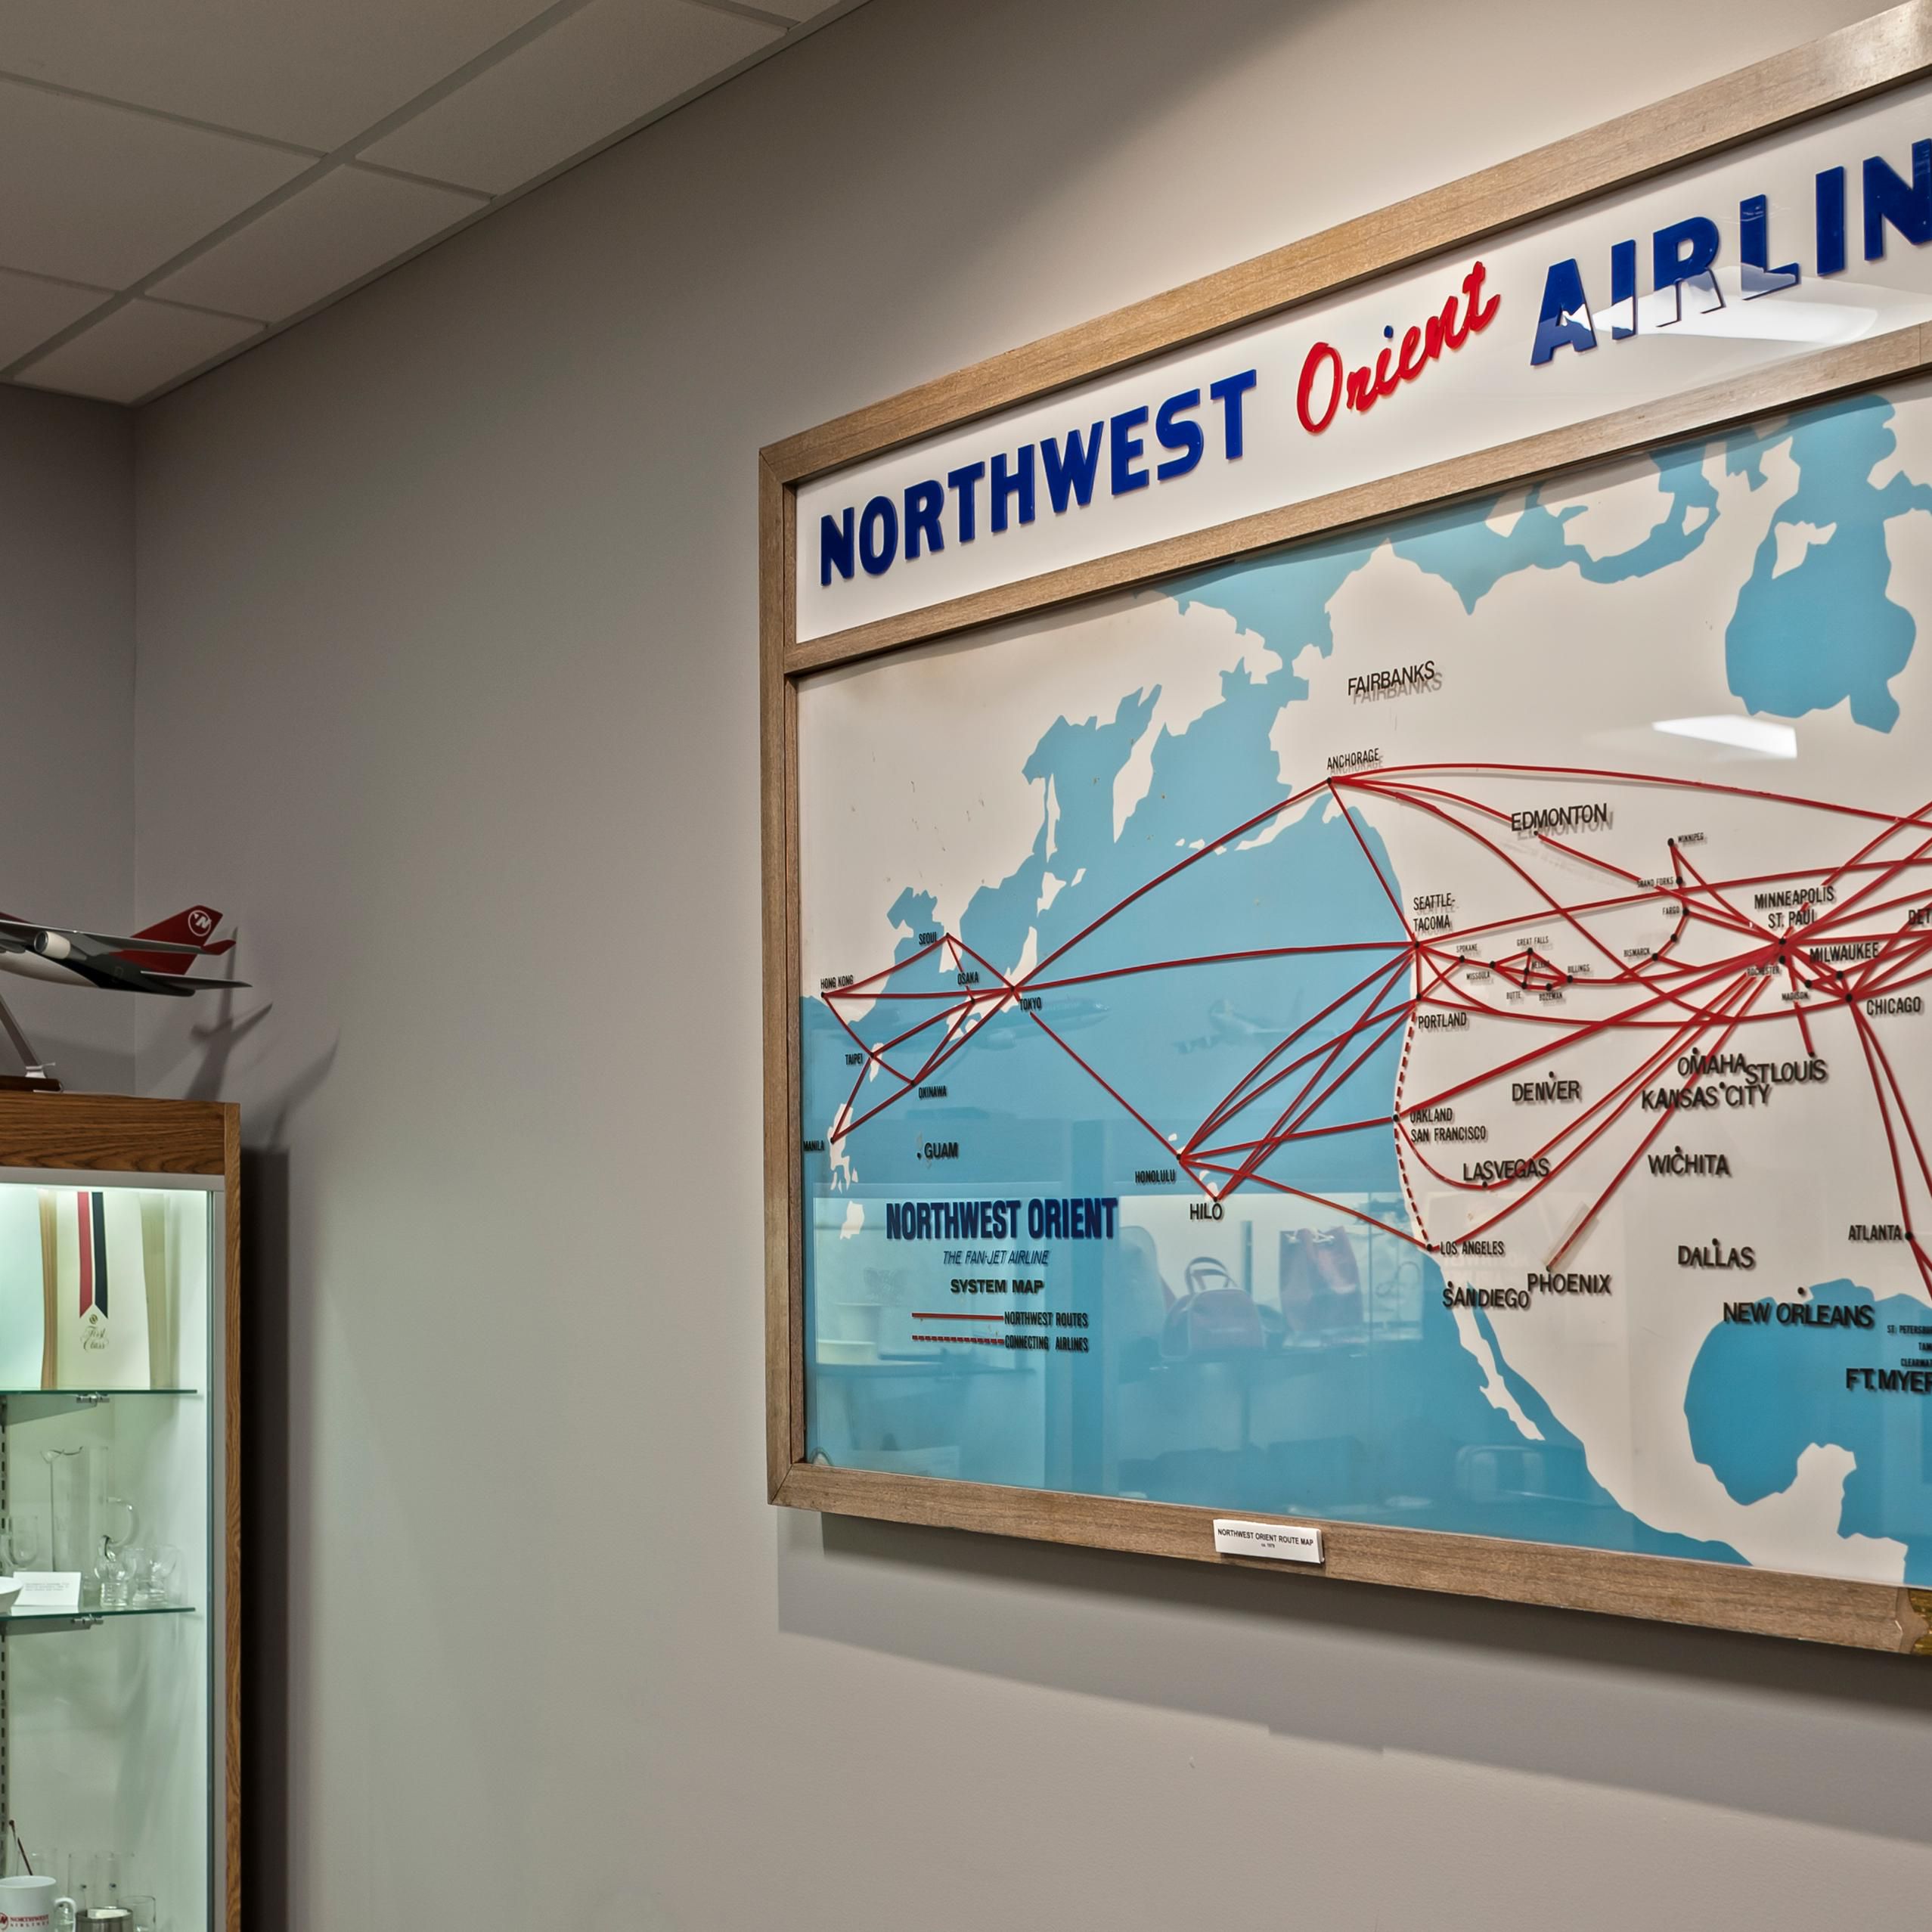 Northwest Airlines History Center located on the 3rd floor